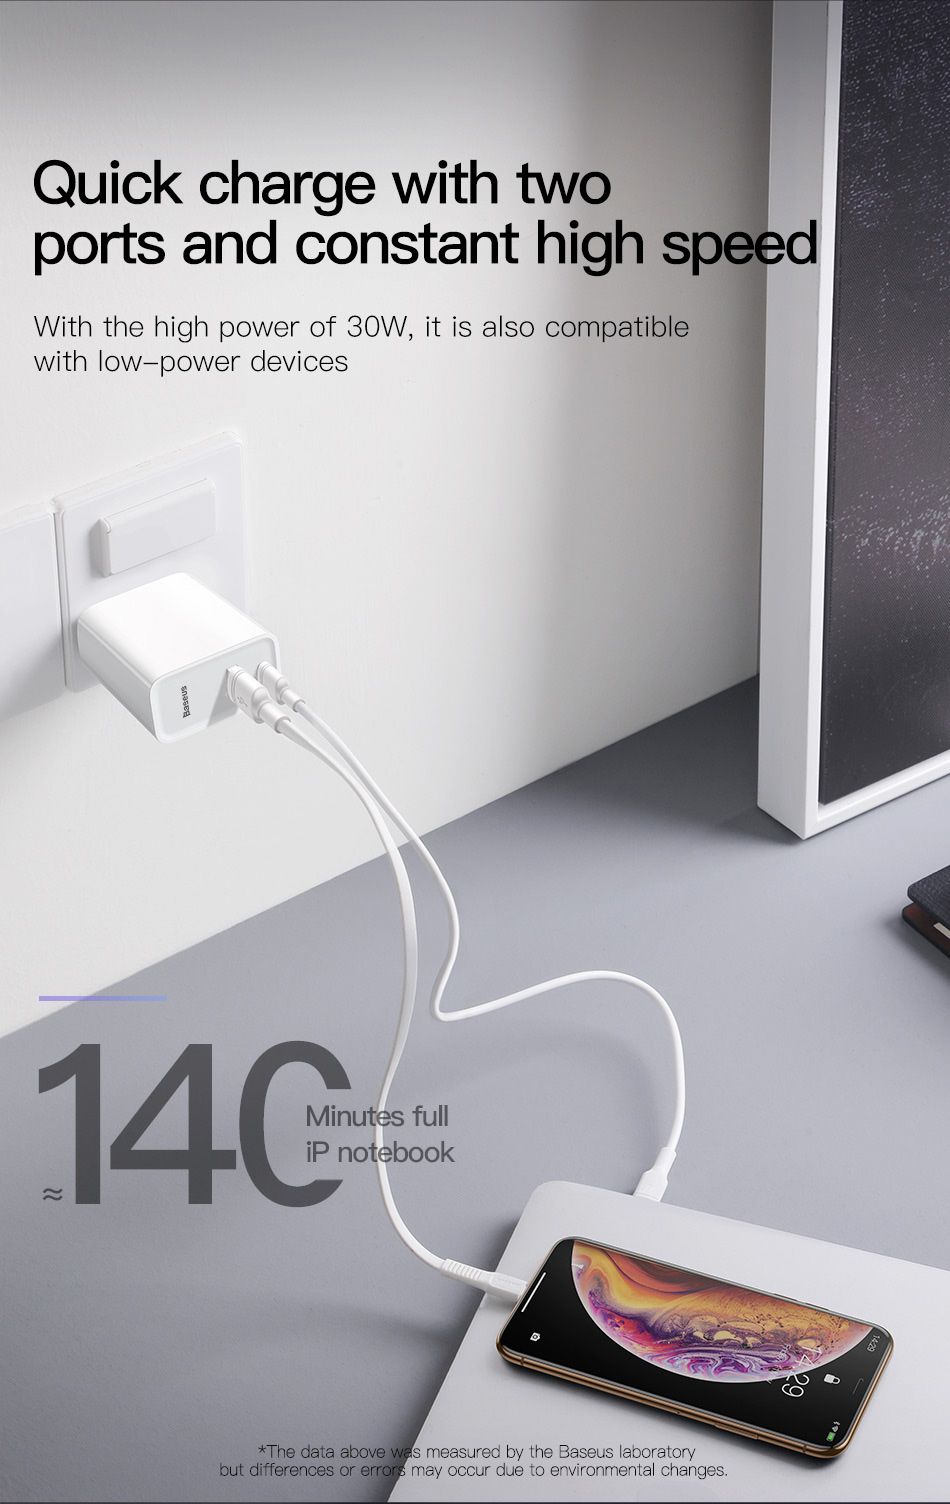 Baseus-BS-CH906-30W-Speedy-Series-PPS-Dual-USB-Quick-Charge-USB-Charger-for-iPhone-11-Pro-XR-X-1618870